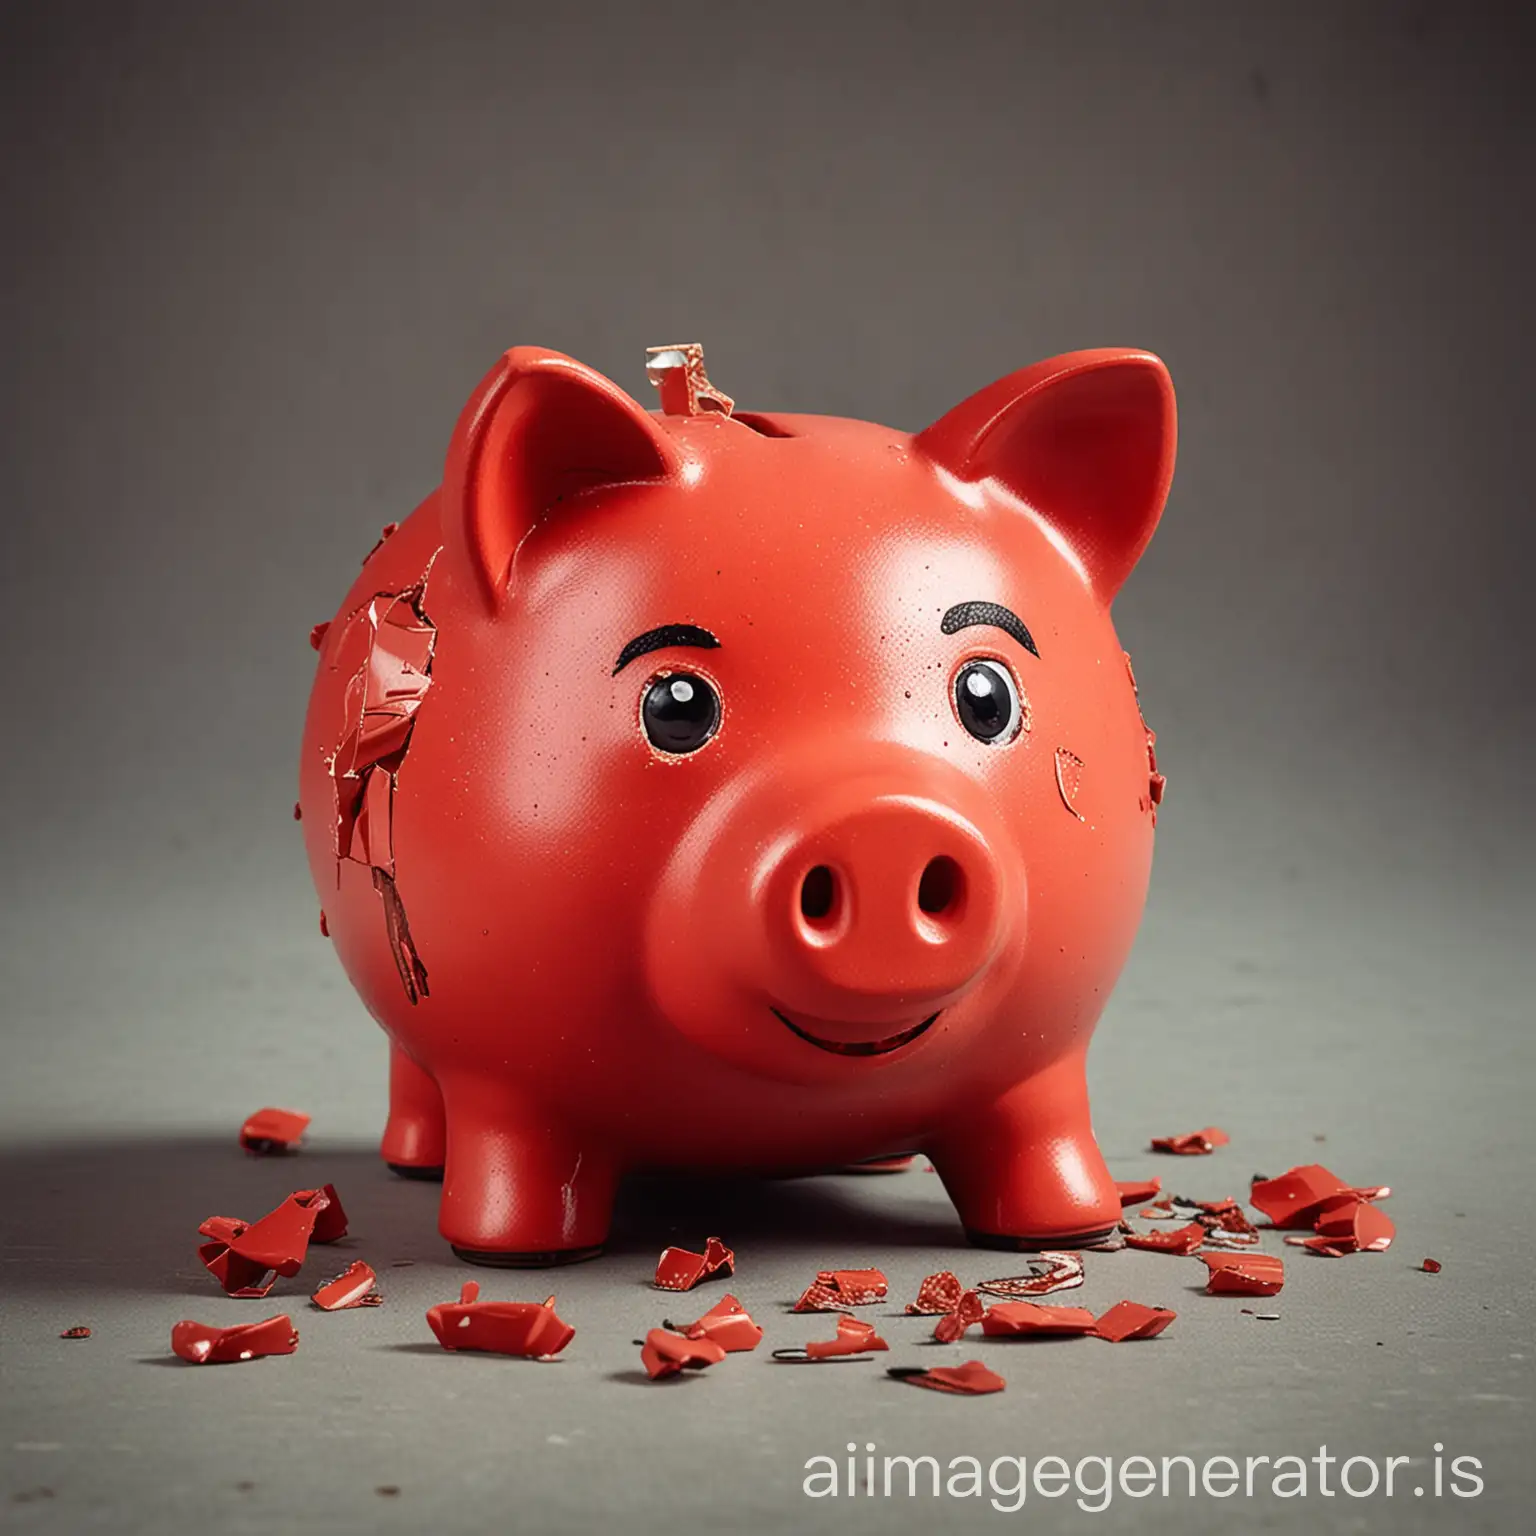 Shattered-Red-Piggy-Bank-with-Scattered-Coins